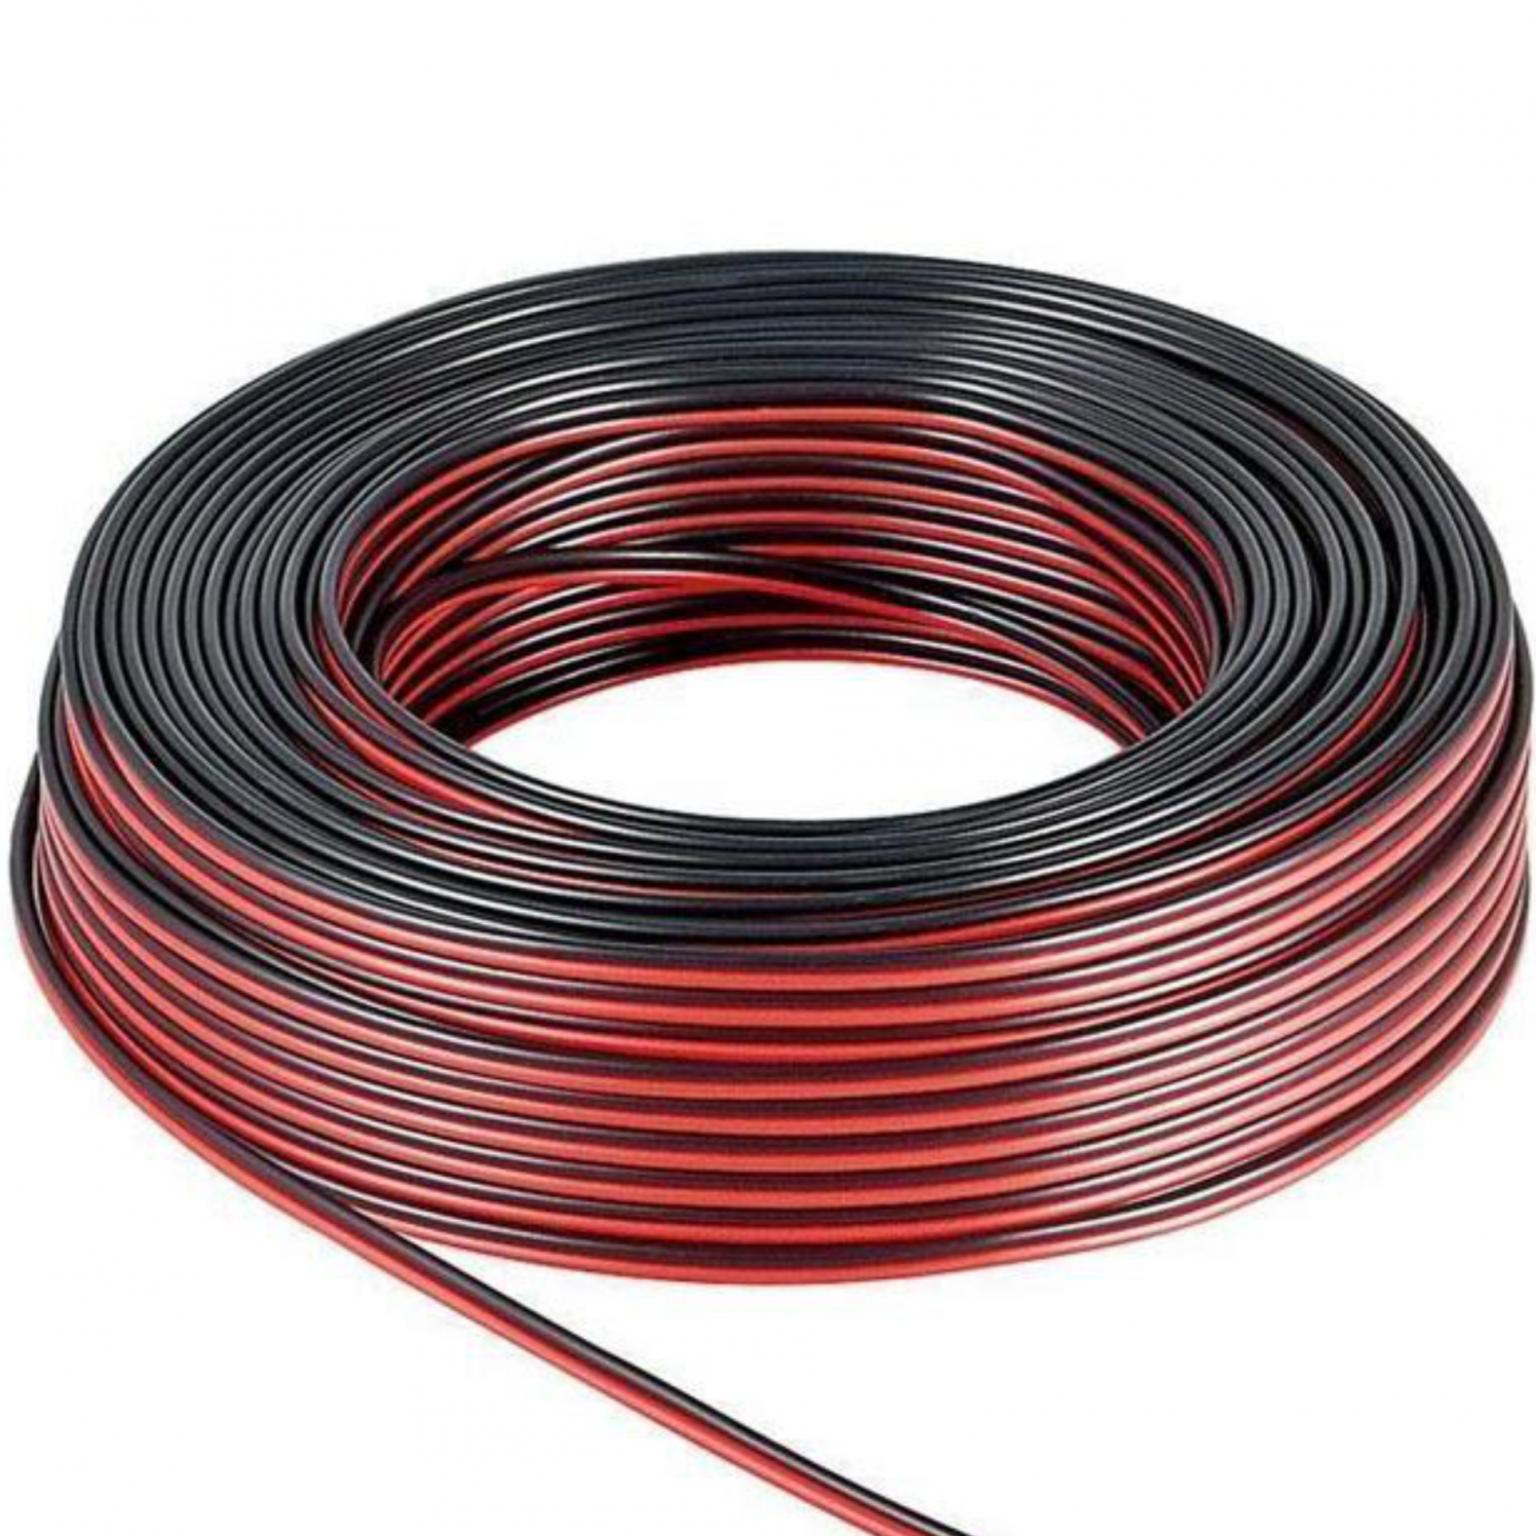 Image of Speaker cable red/black 25 m roll, cable diameter 2 x 0,75 mm? - Gooba